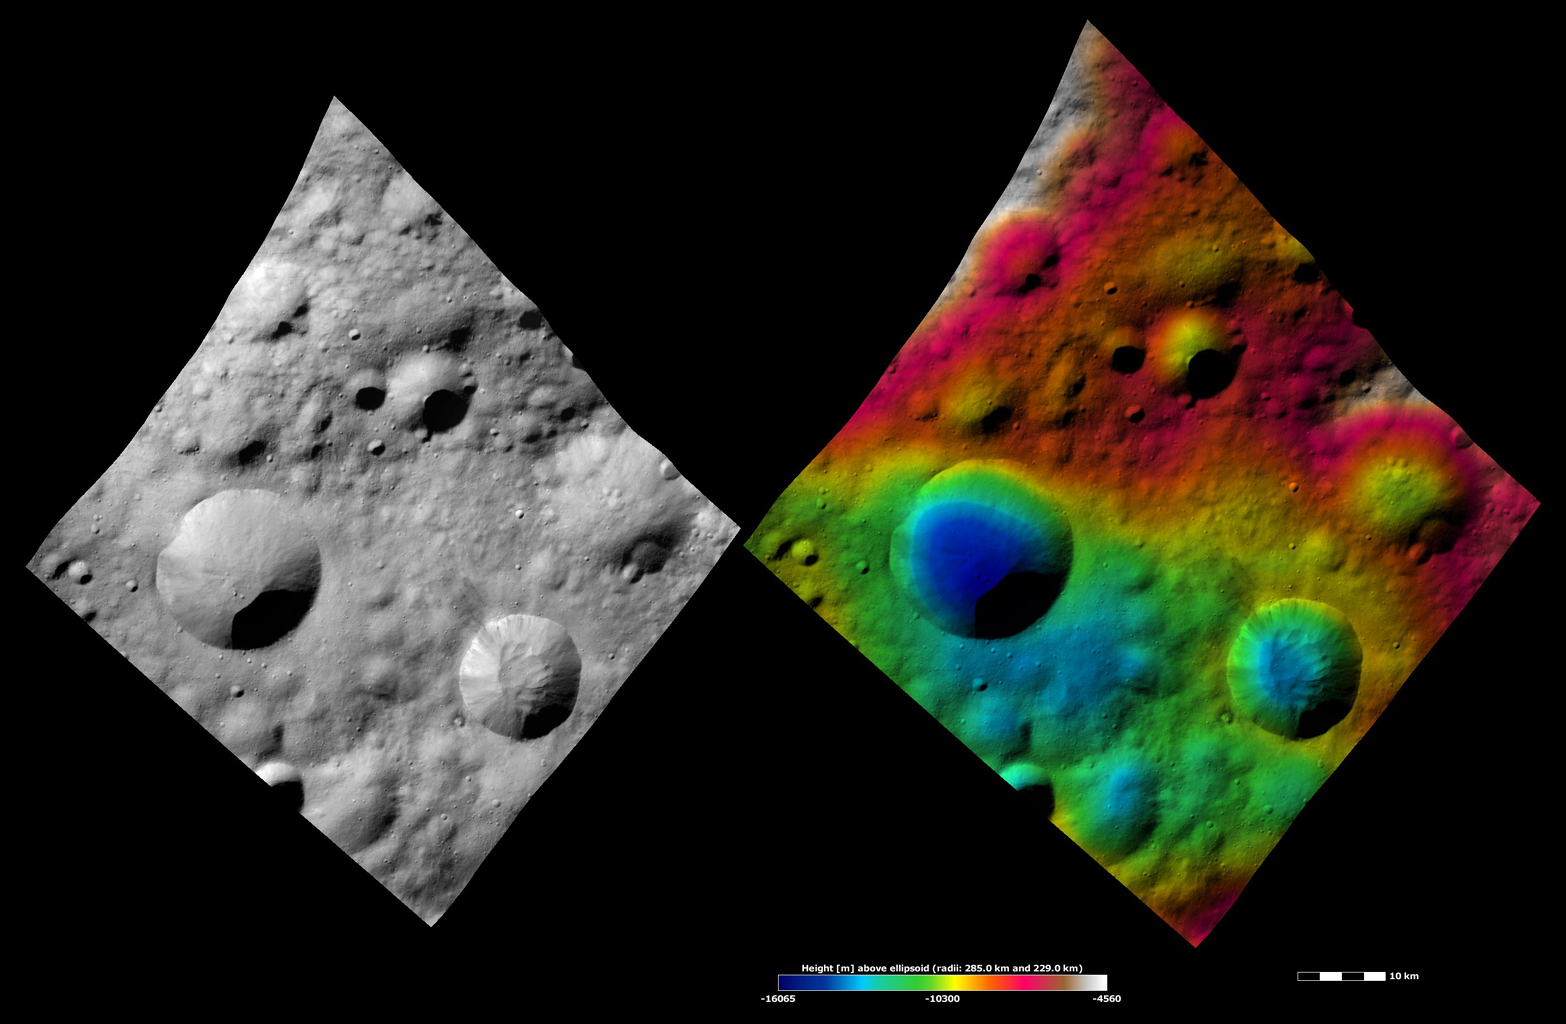 Apparent Brightness and Topography Images of Publicia Crater